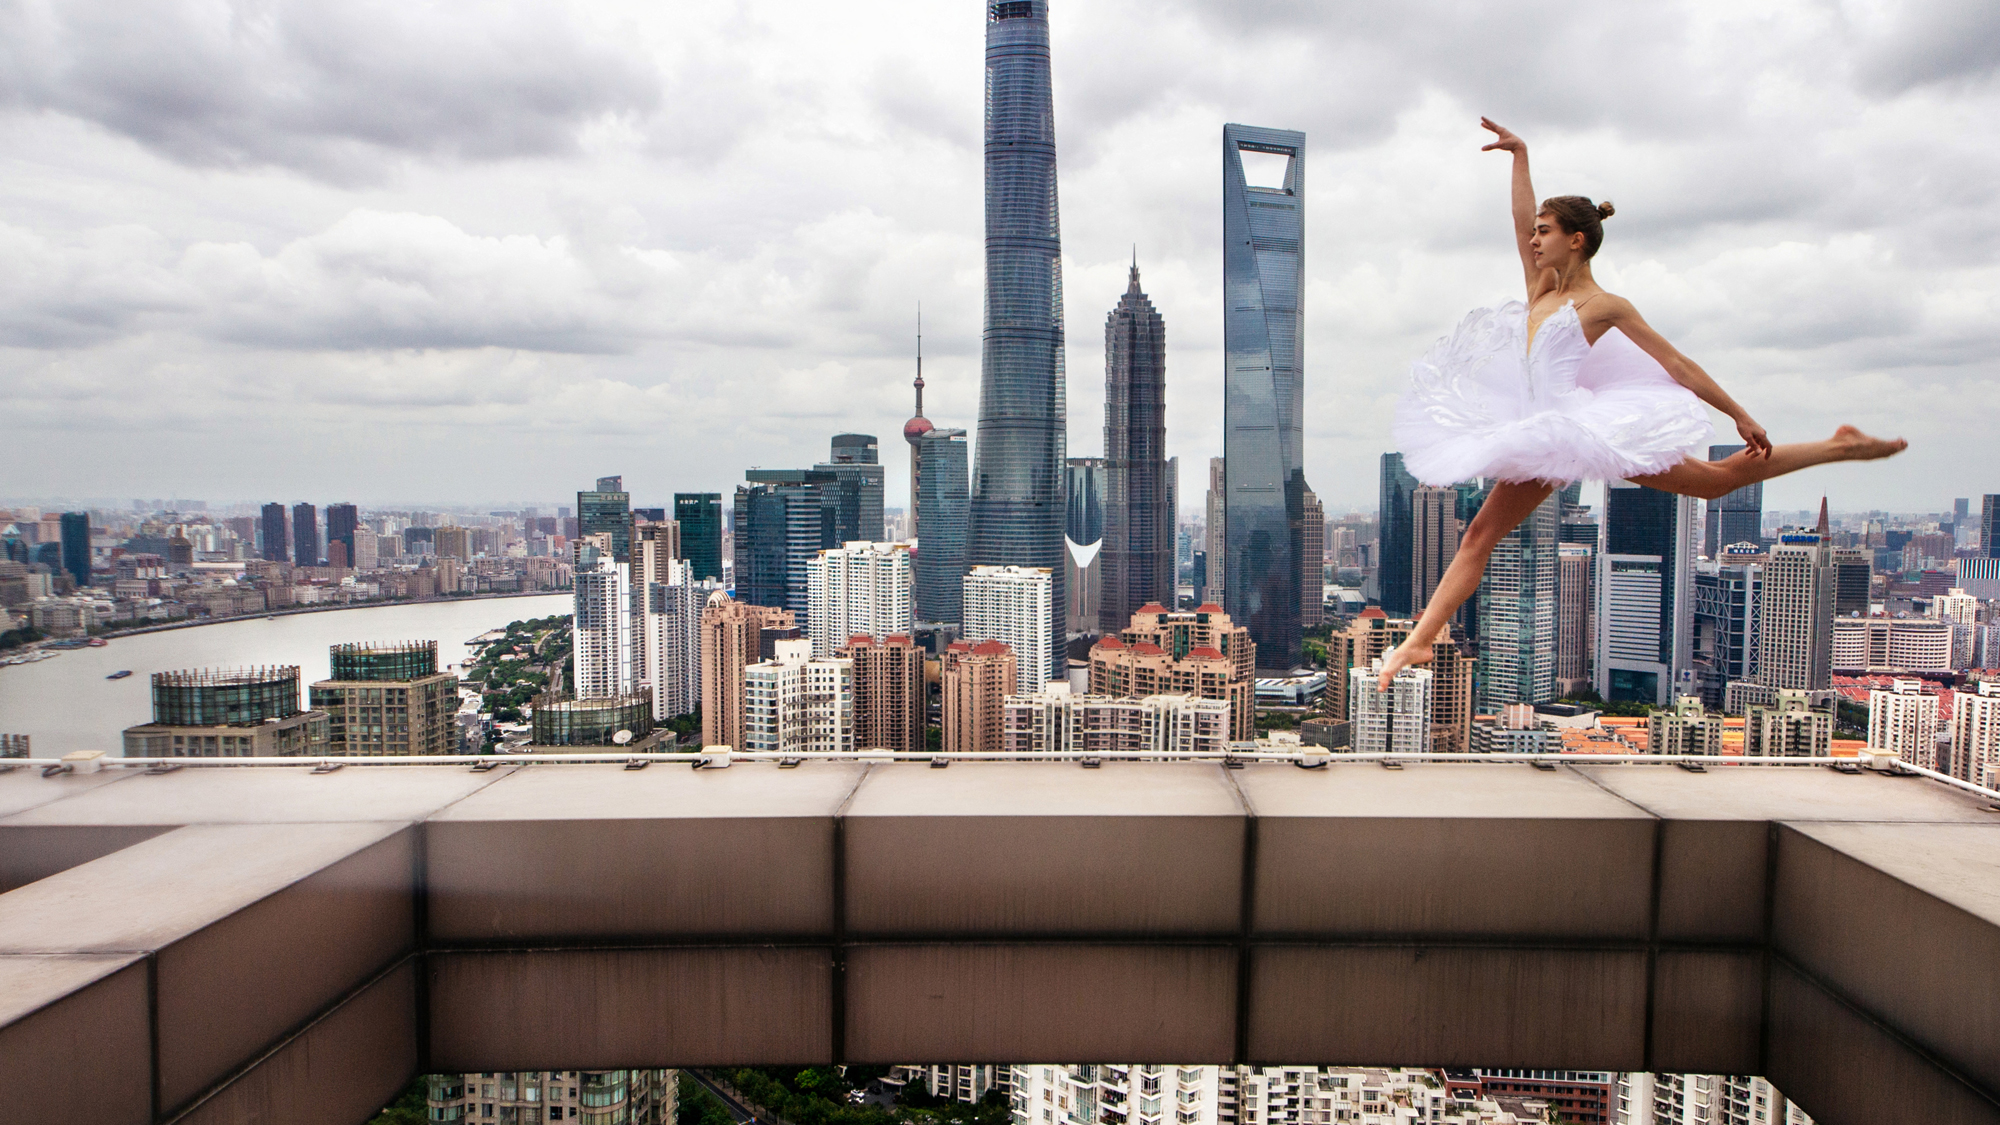 Woman in white tutu leaps on top of building with skyline in background